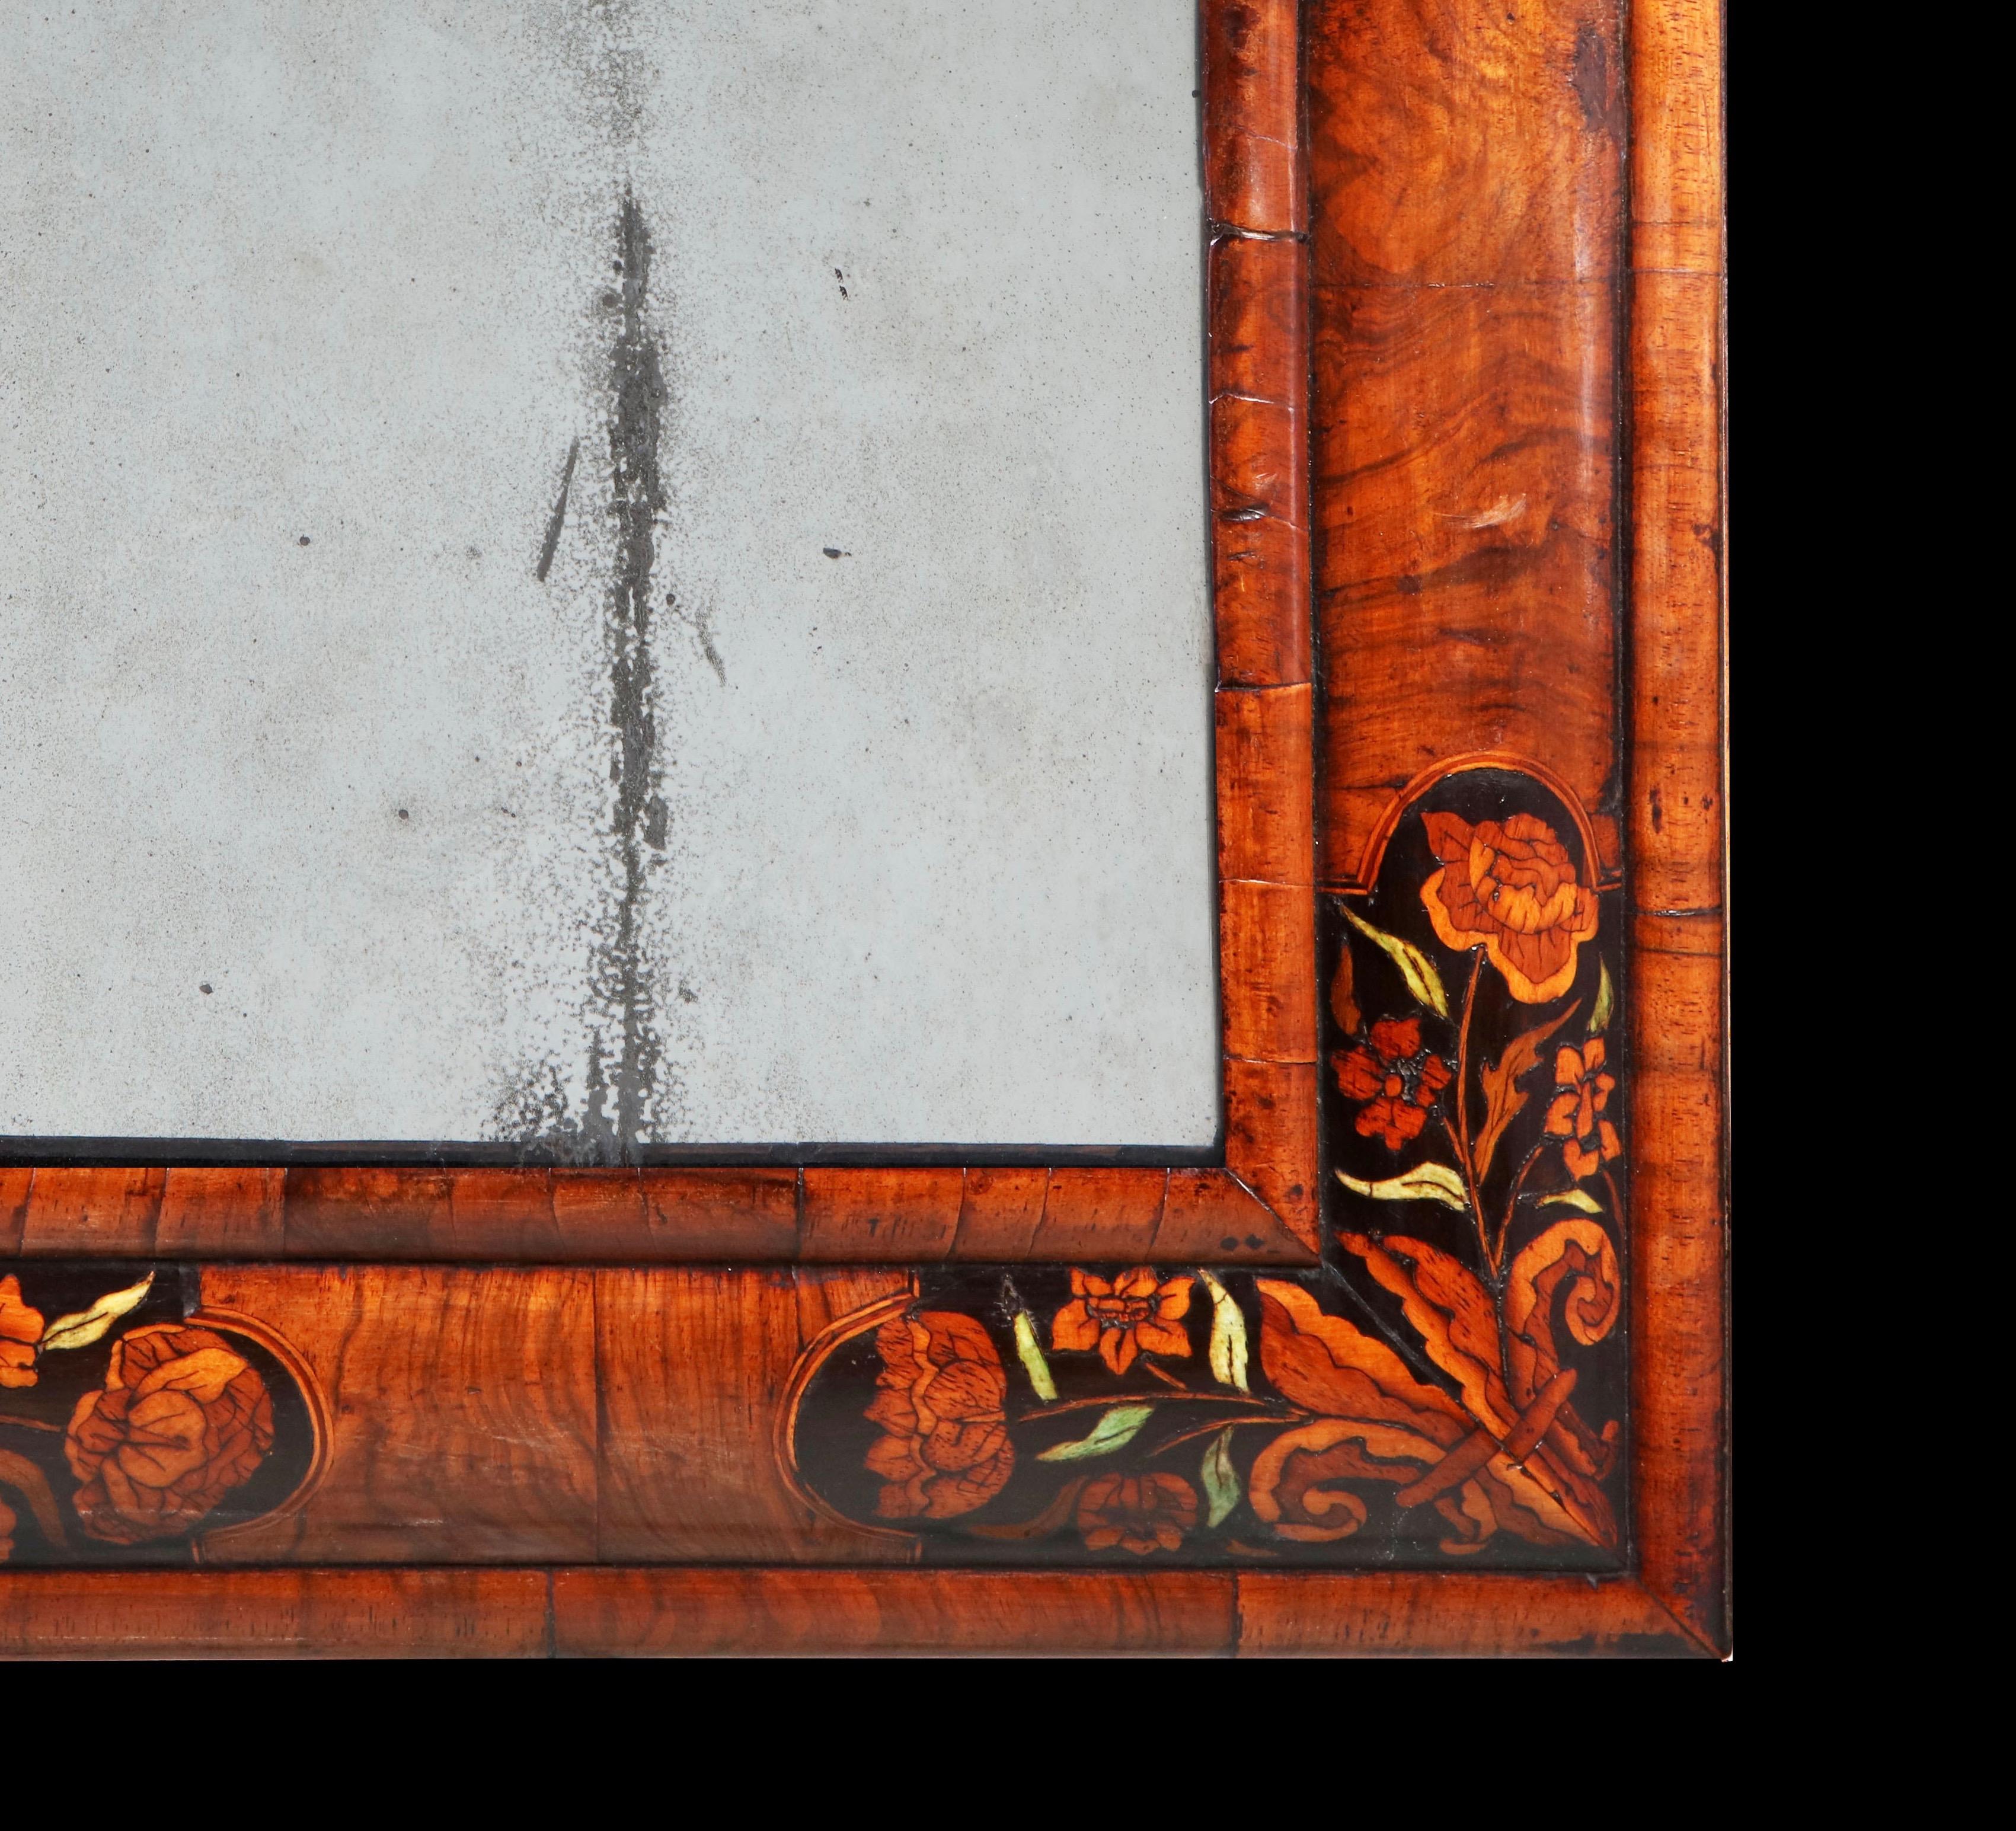 From the restoration of the British Monarchy (1670-1685) we bring to you this charming walnut and marquetry cushion mirror depicting spring flowers and scrolling fleur-de-lis inside ebony and box strung break-arch reserves, on an ebony